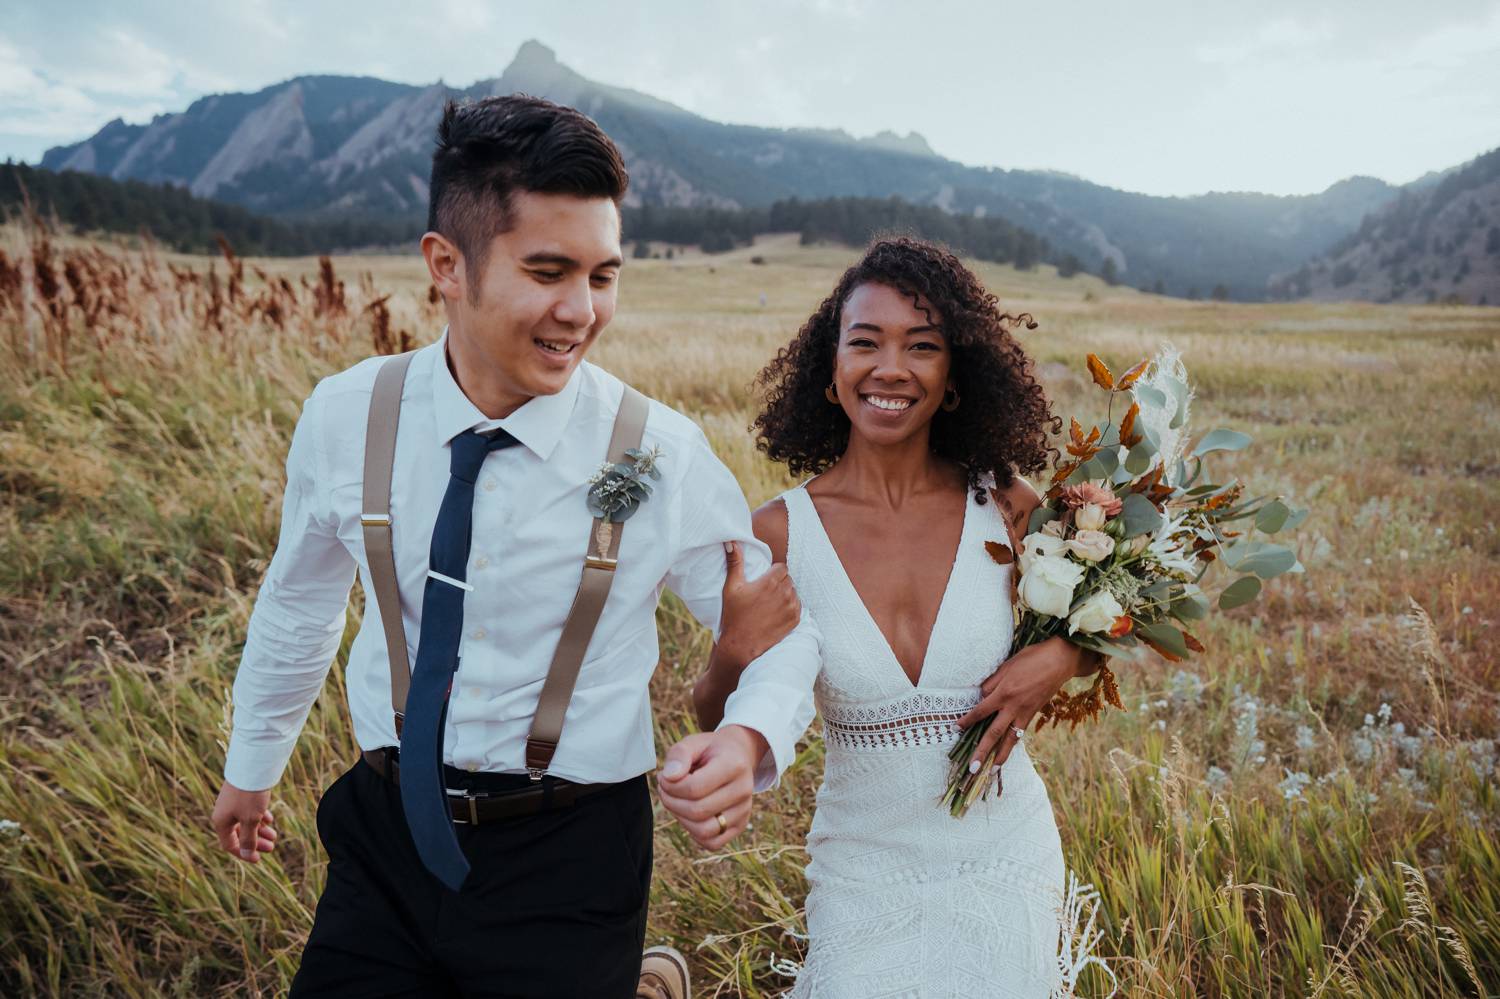 Customer Loyalty: By Nick Sparks, a bride and groom stroll together through a field of wheat with the Denver Mountains in the background.